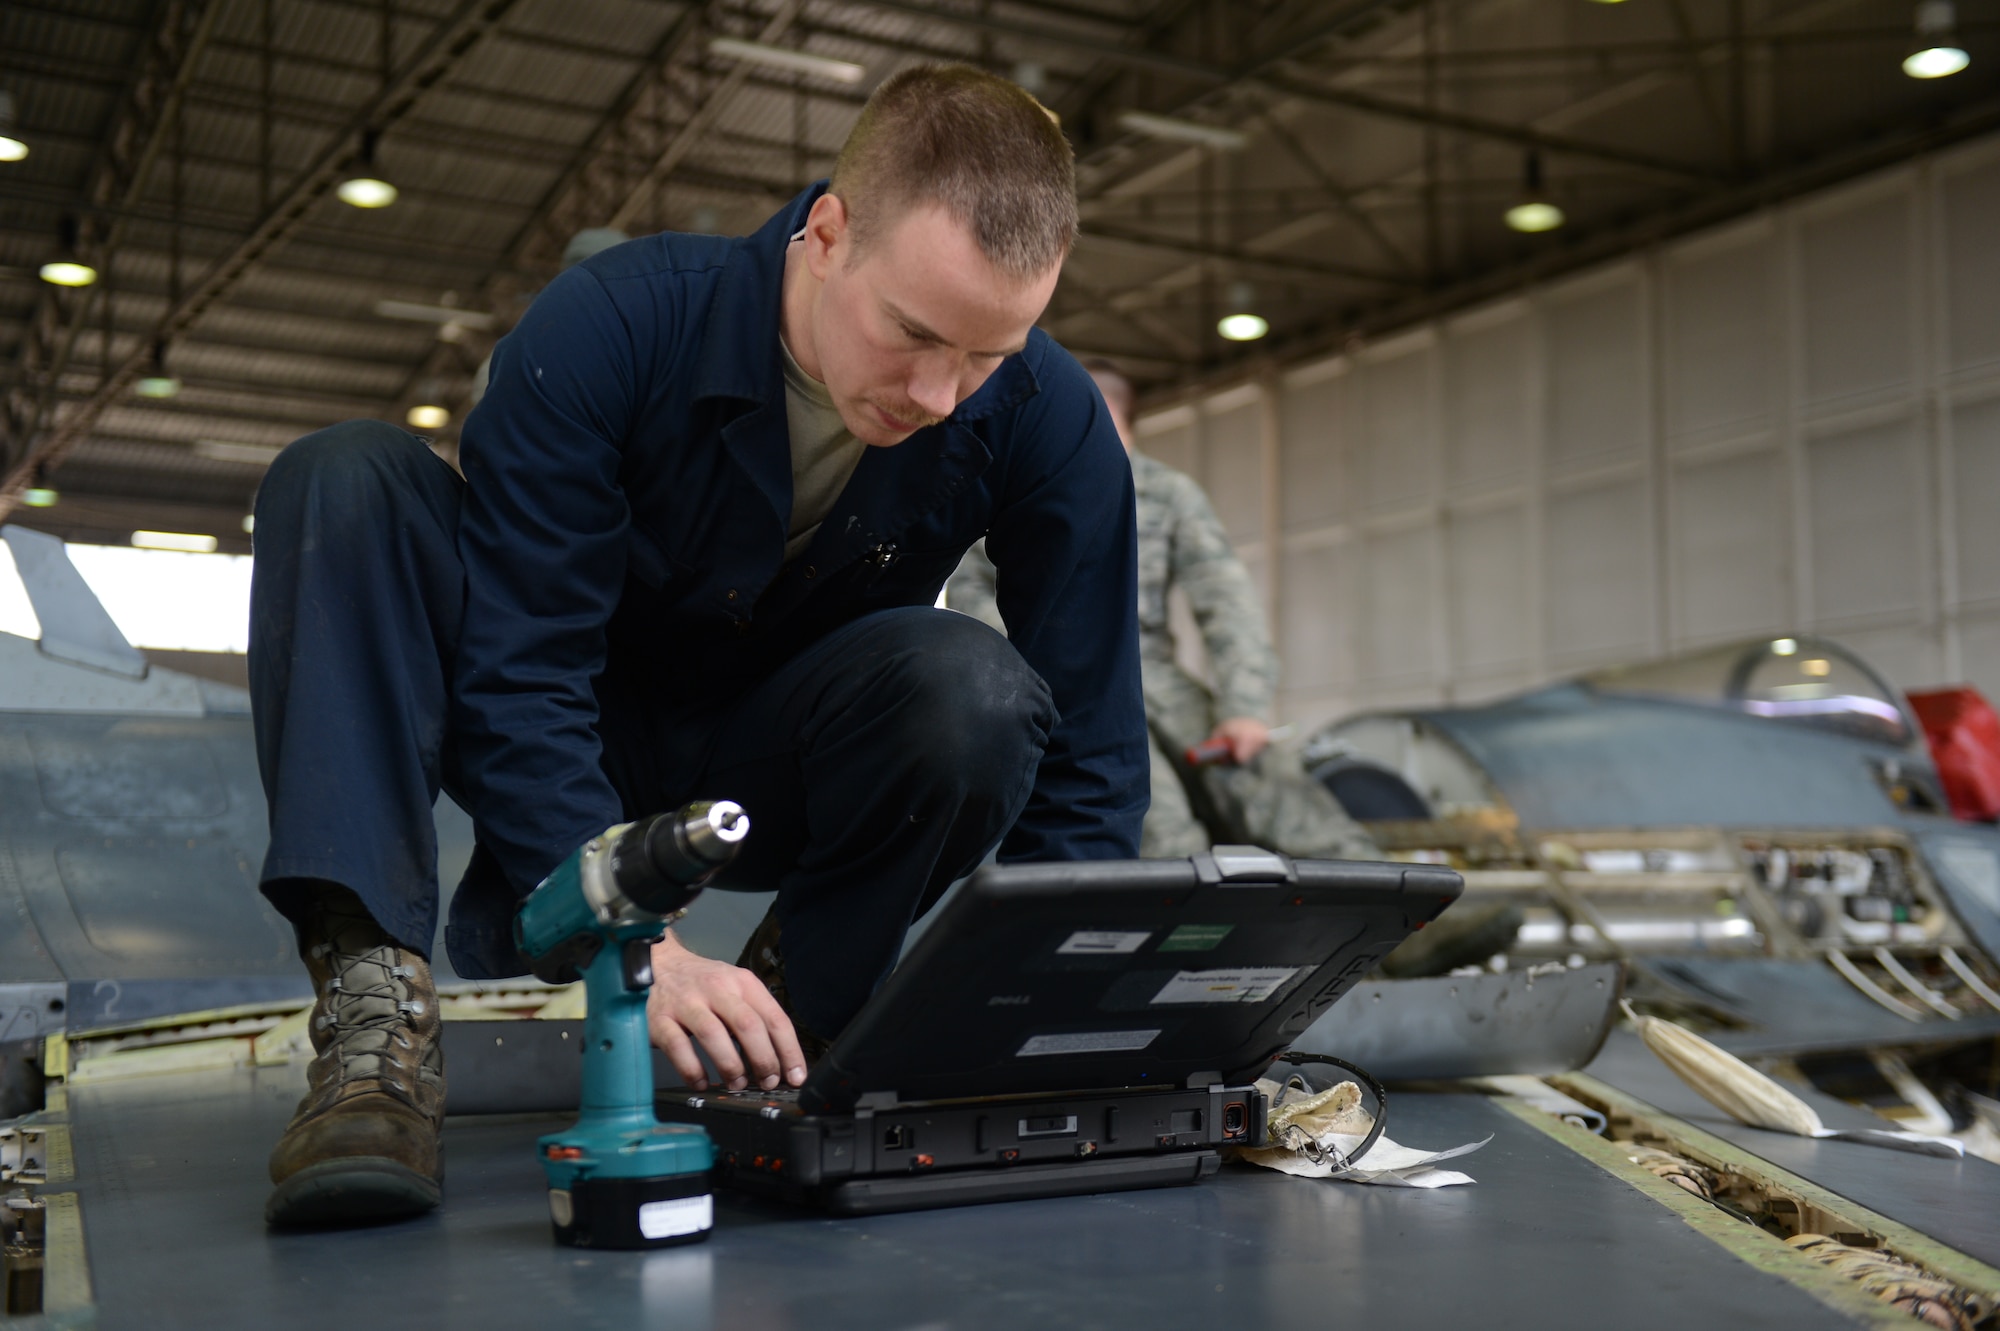 SPANGDAHLEM AIR BASE, Germany – U.S. Air Force Senior Airman Todd Hughes, 52nd Equipment Maintenance Squadron inspection team member from Williamsport, Pa., reviews instructions for replacing panels on a U.S. Air Force F-16 Fighting Falcon fighter aircraft March 27, 2013. U.S. Air Force guidelines require Hughes to review the instructions prior to performing maintenance to be sure the aircraft is safe for flight. (U.S. Air Force photo by Airman 1st Class Gustavo Castillo/Released)